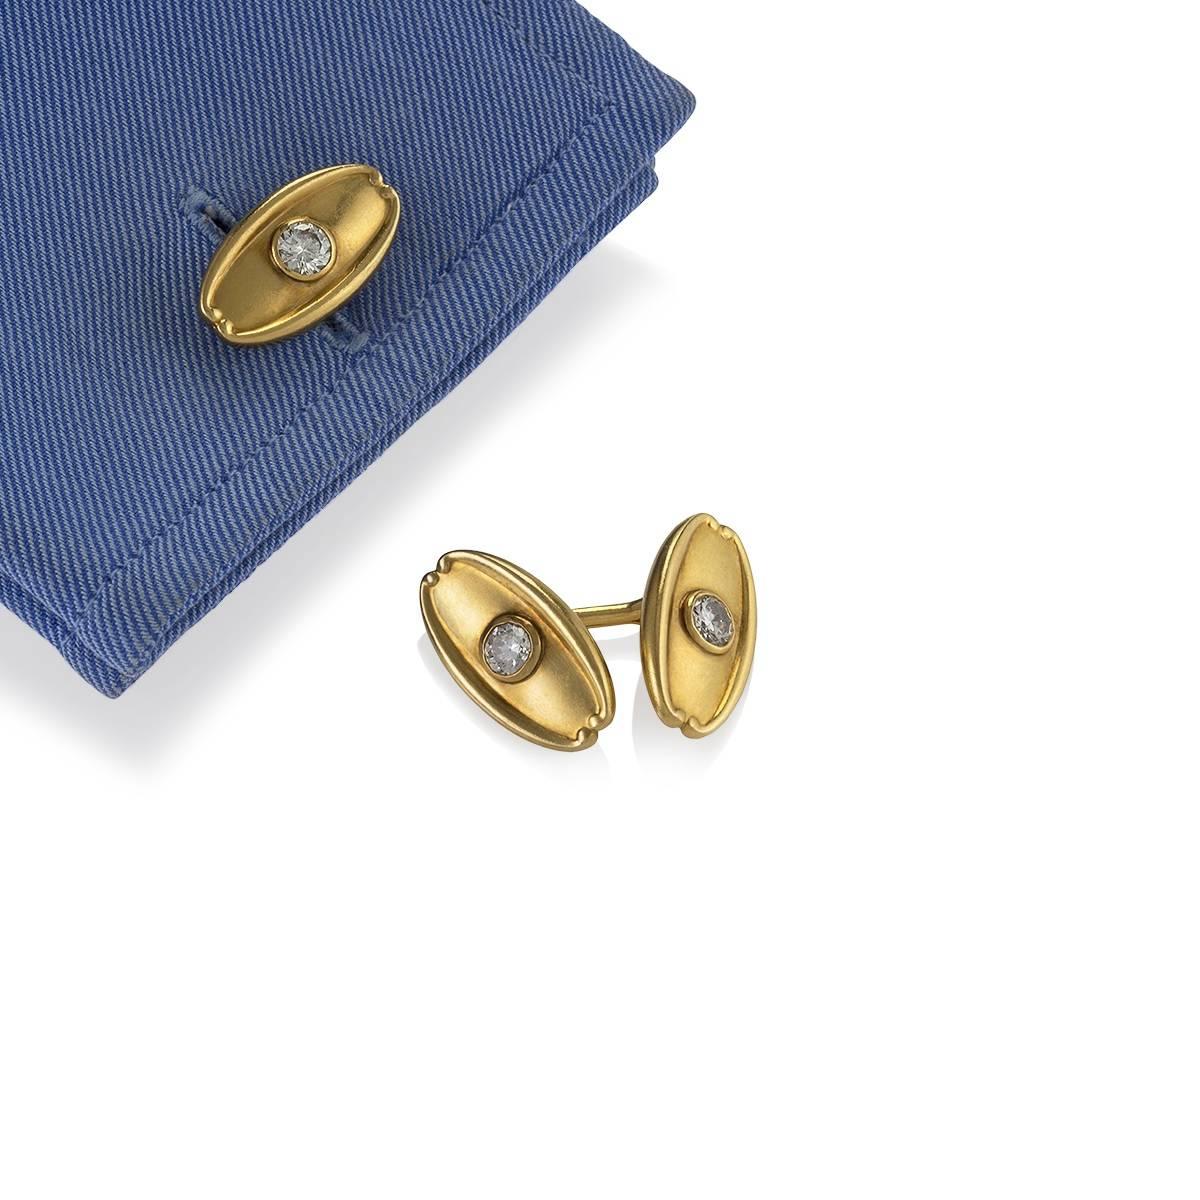 A pair of Antique 18 karat gold cuff links with diamonds by Tiffany & Co. The heavy, lozenge-shaped cuff links have 4 old European-cut diamonds with an approximate total weight of 1.50 carat, H-I color, VS clarity.  Double-sided. With later, signed,